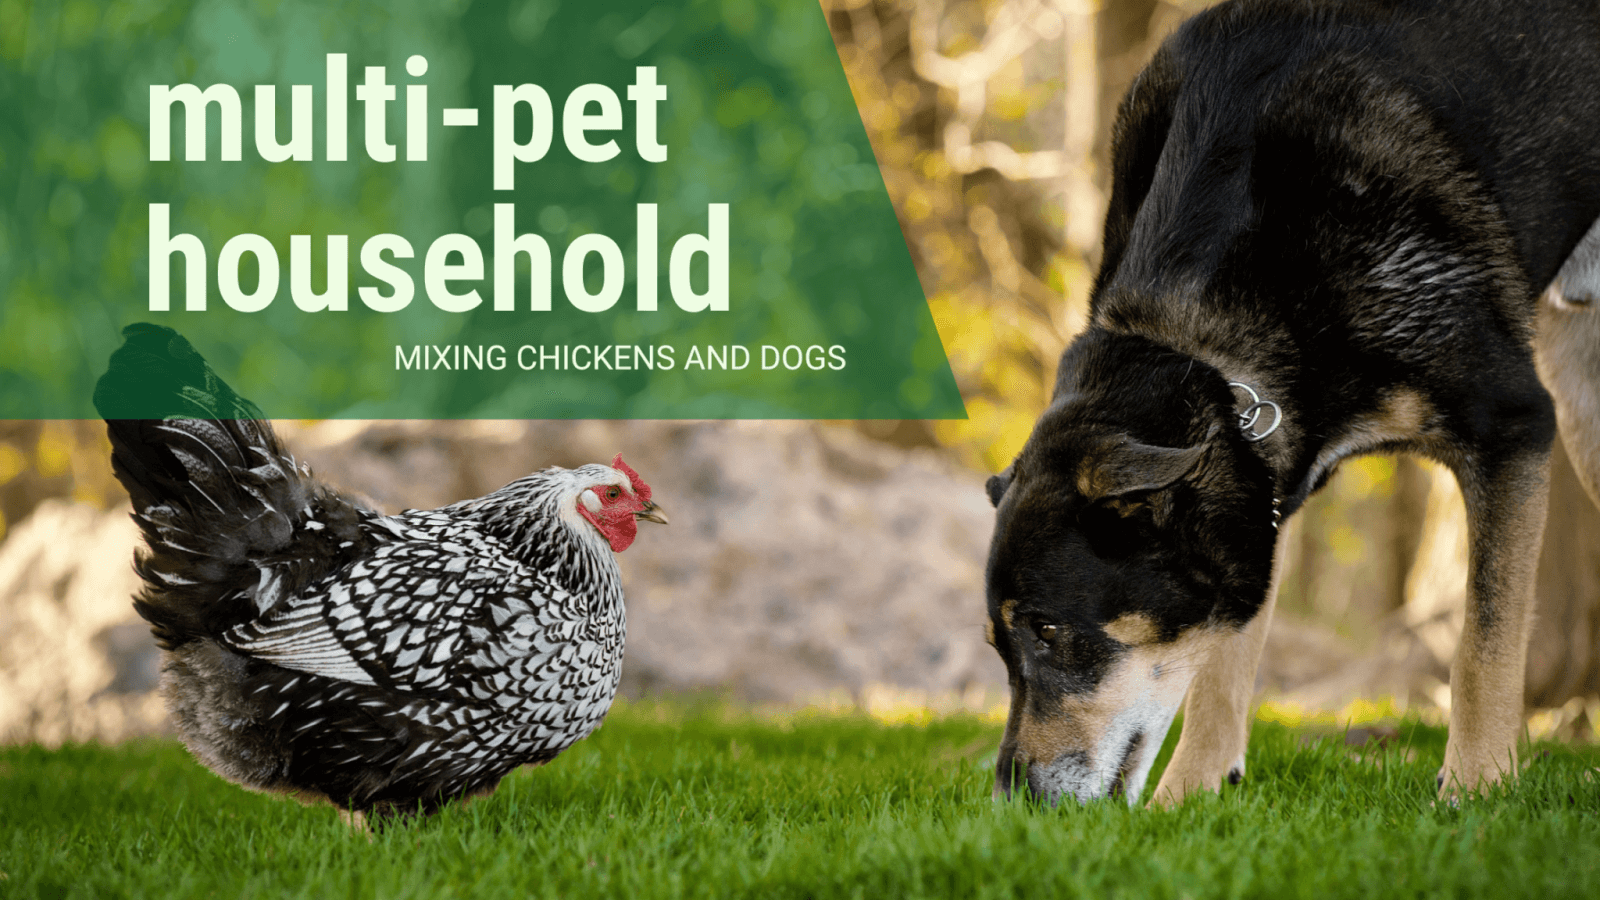 MULTI PET HOUSEHOLD MIXING CHICKENS AND DOGS